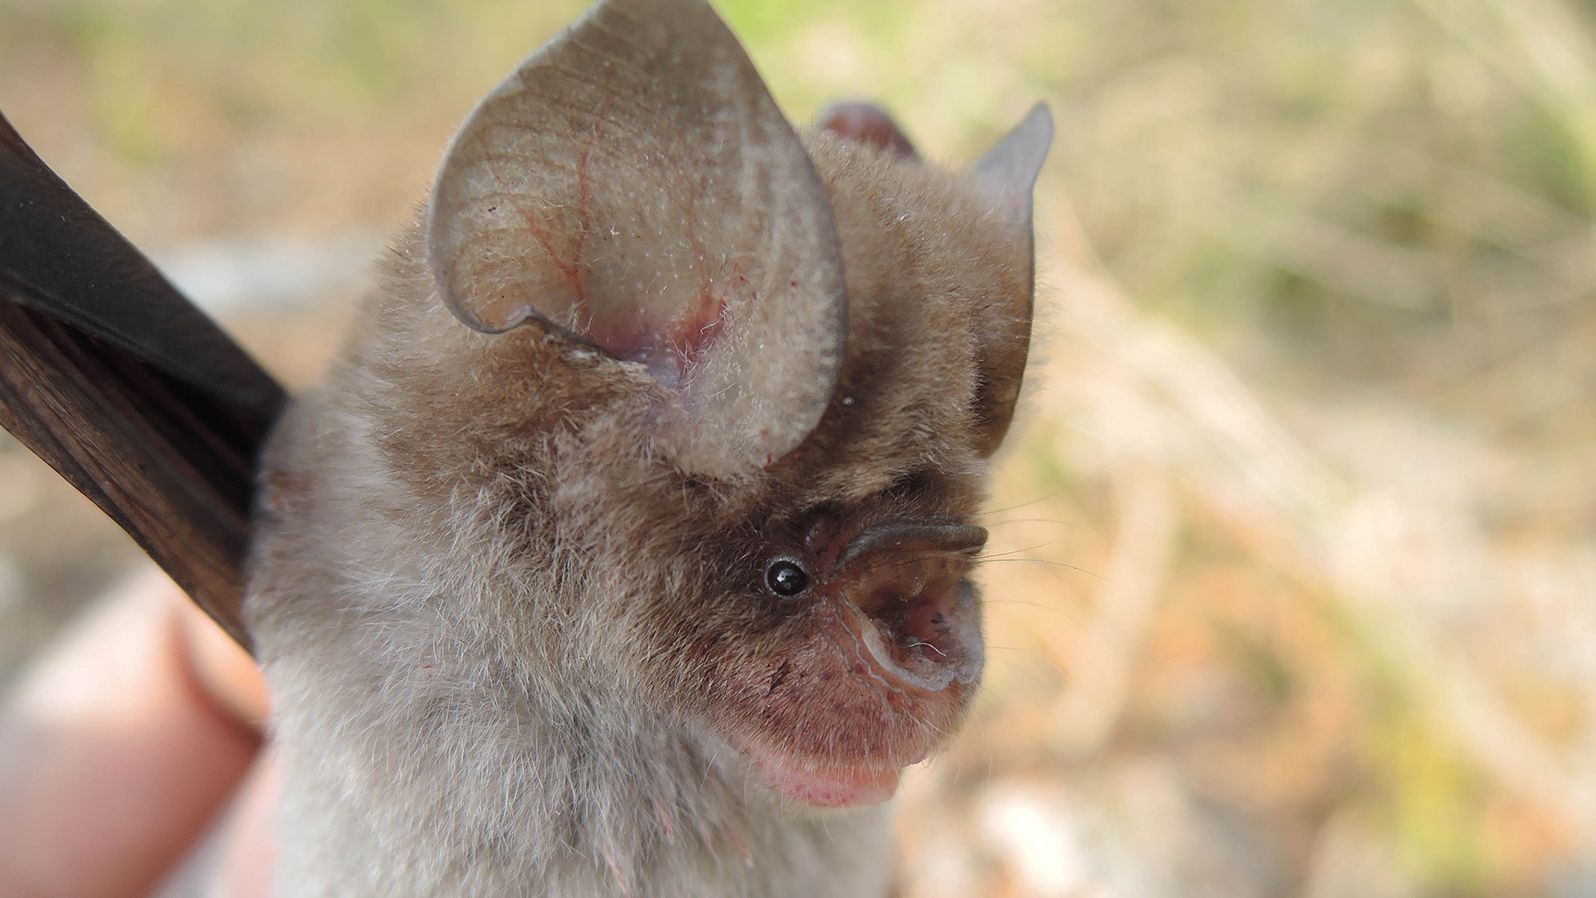 Four new species of leaf-nosed bats have just been discovered.